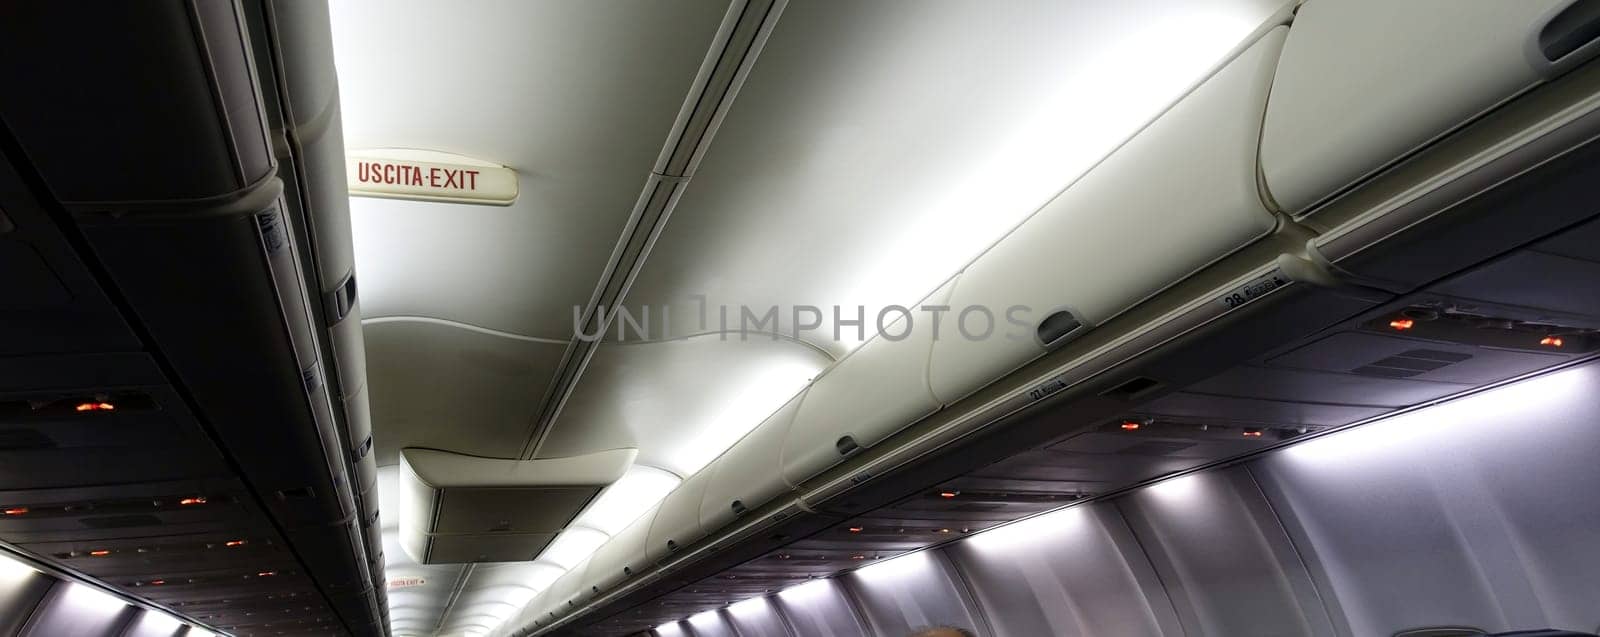 The interior ceiling of an aircraft by Jamaladeen